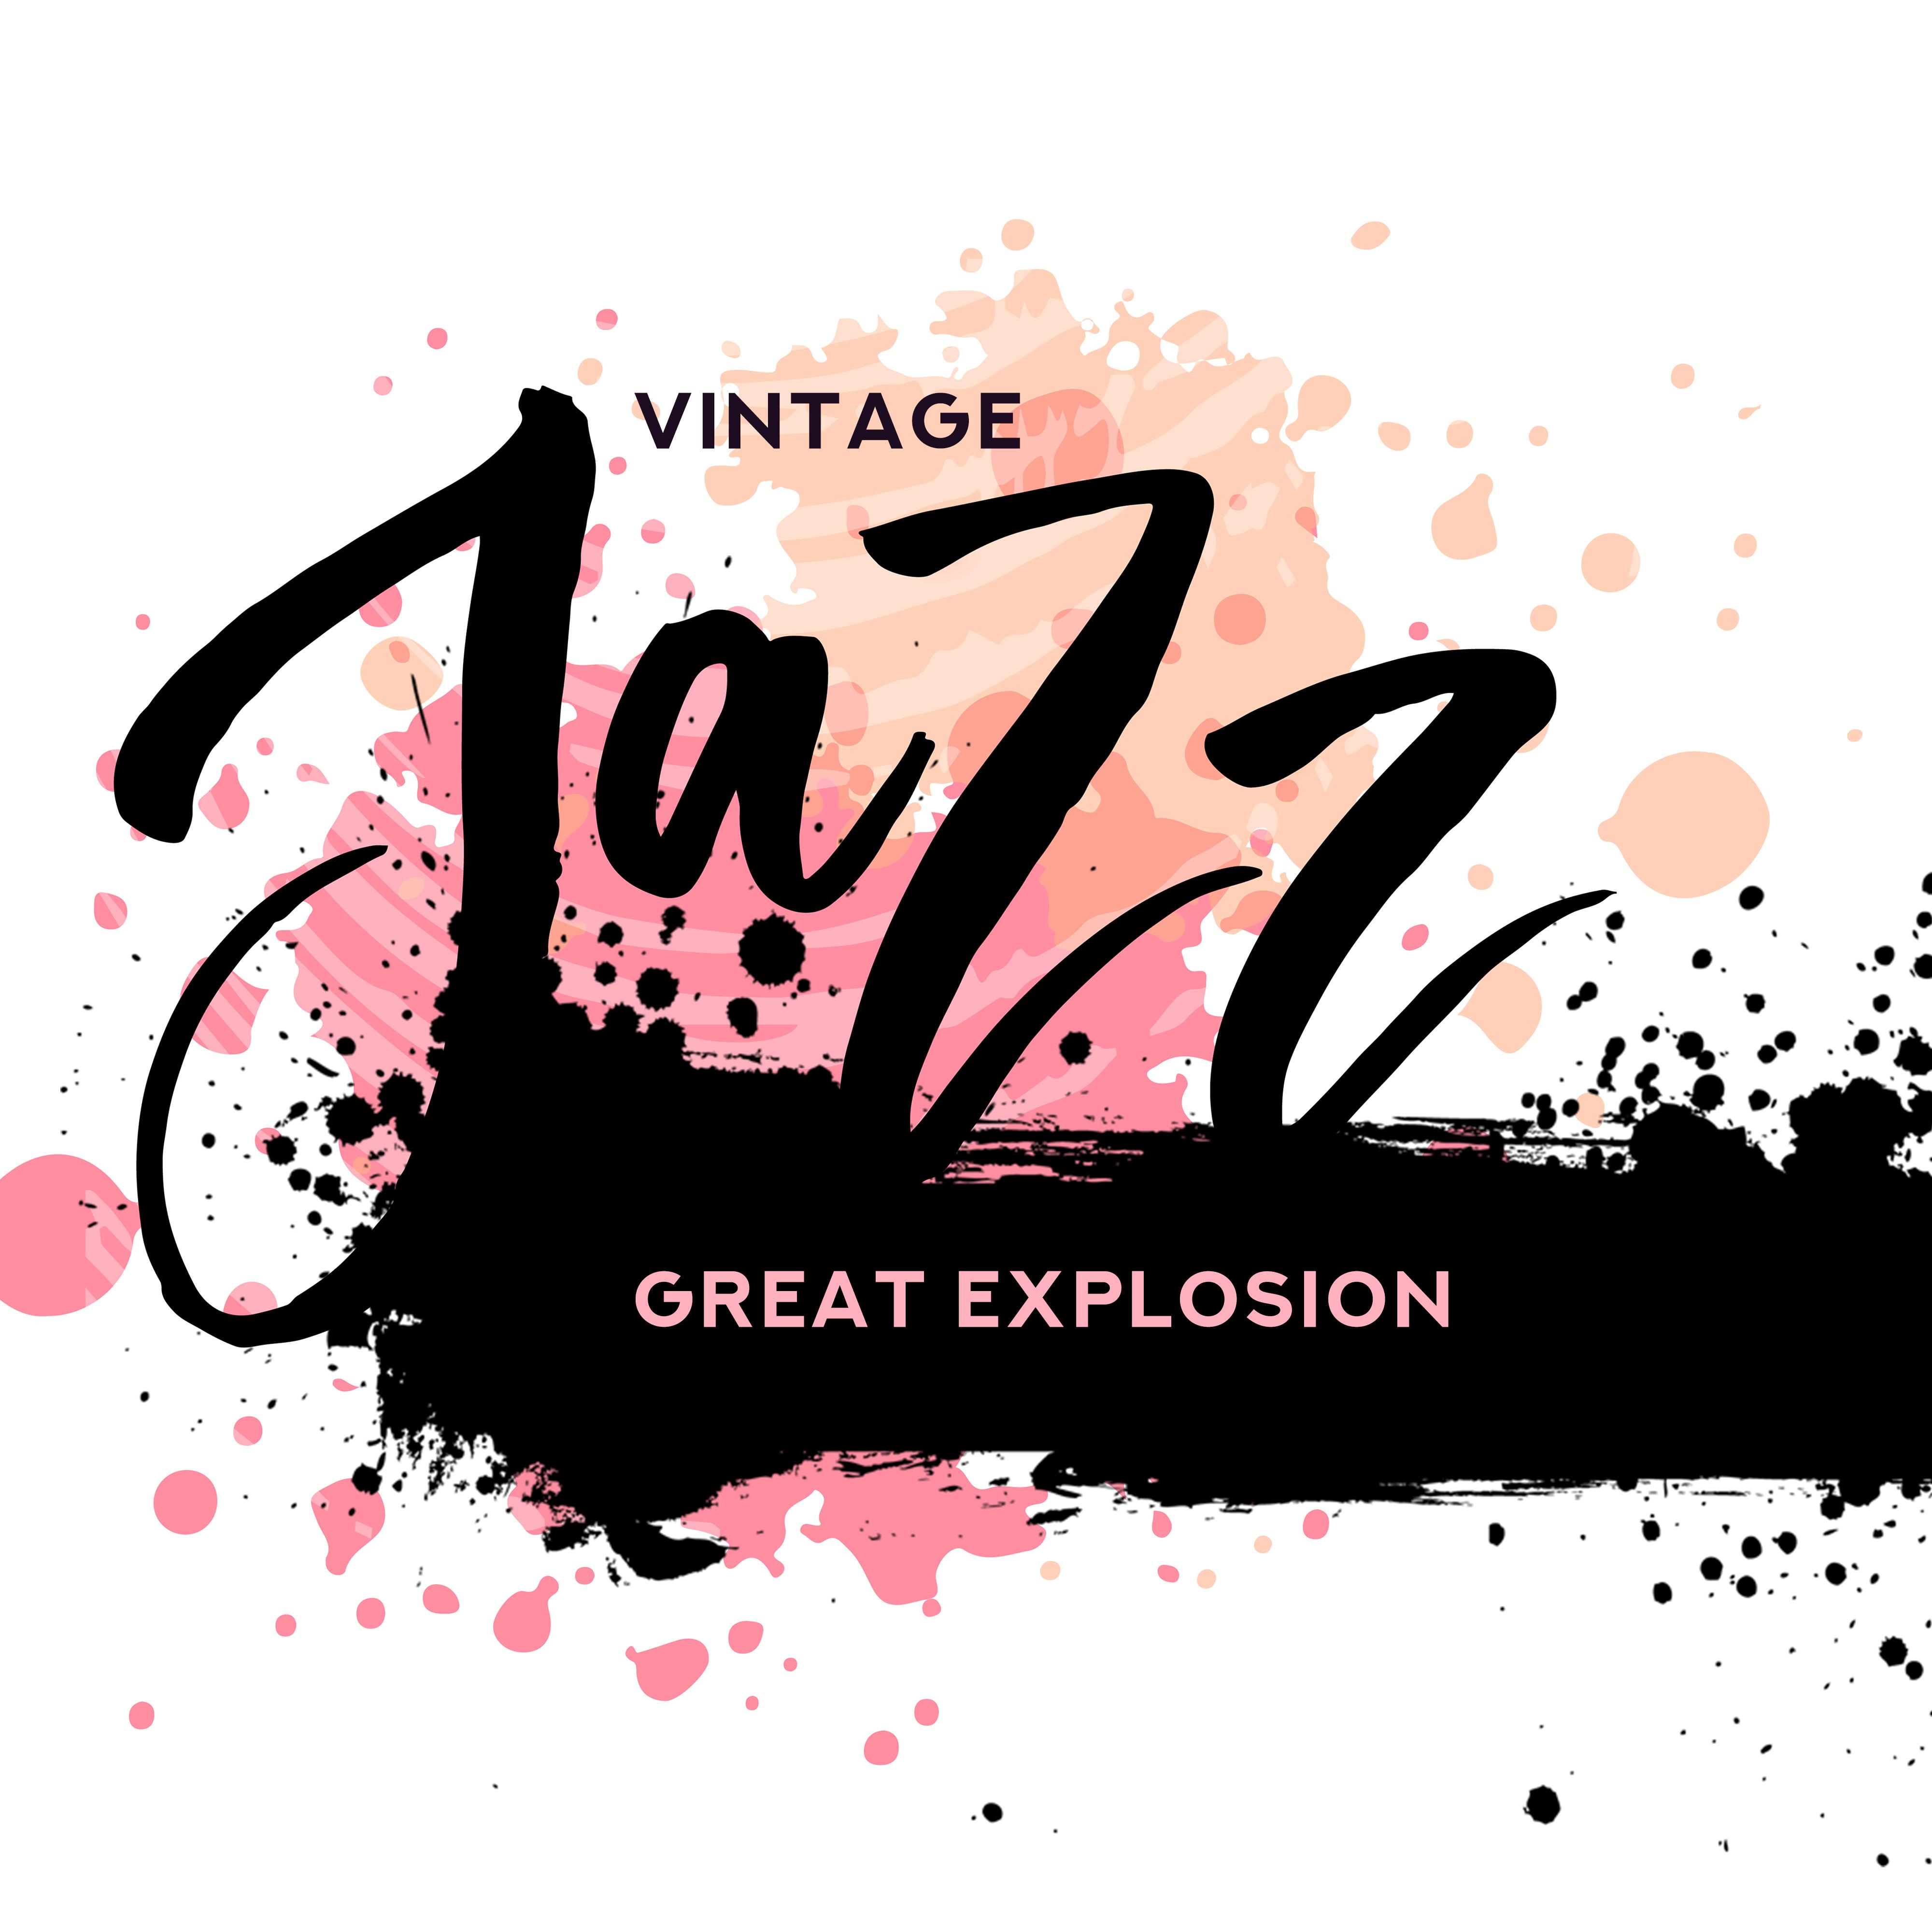 Vintage Jazz Great Explosion: Compilation of Best 2019 Smooth Swing Jazz, Light & Funny Vintage Melodies Played on Piano, Trombone, Trumpet, Sax & Guitar, Old Jazz Cafe or Club Sounds